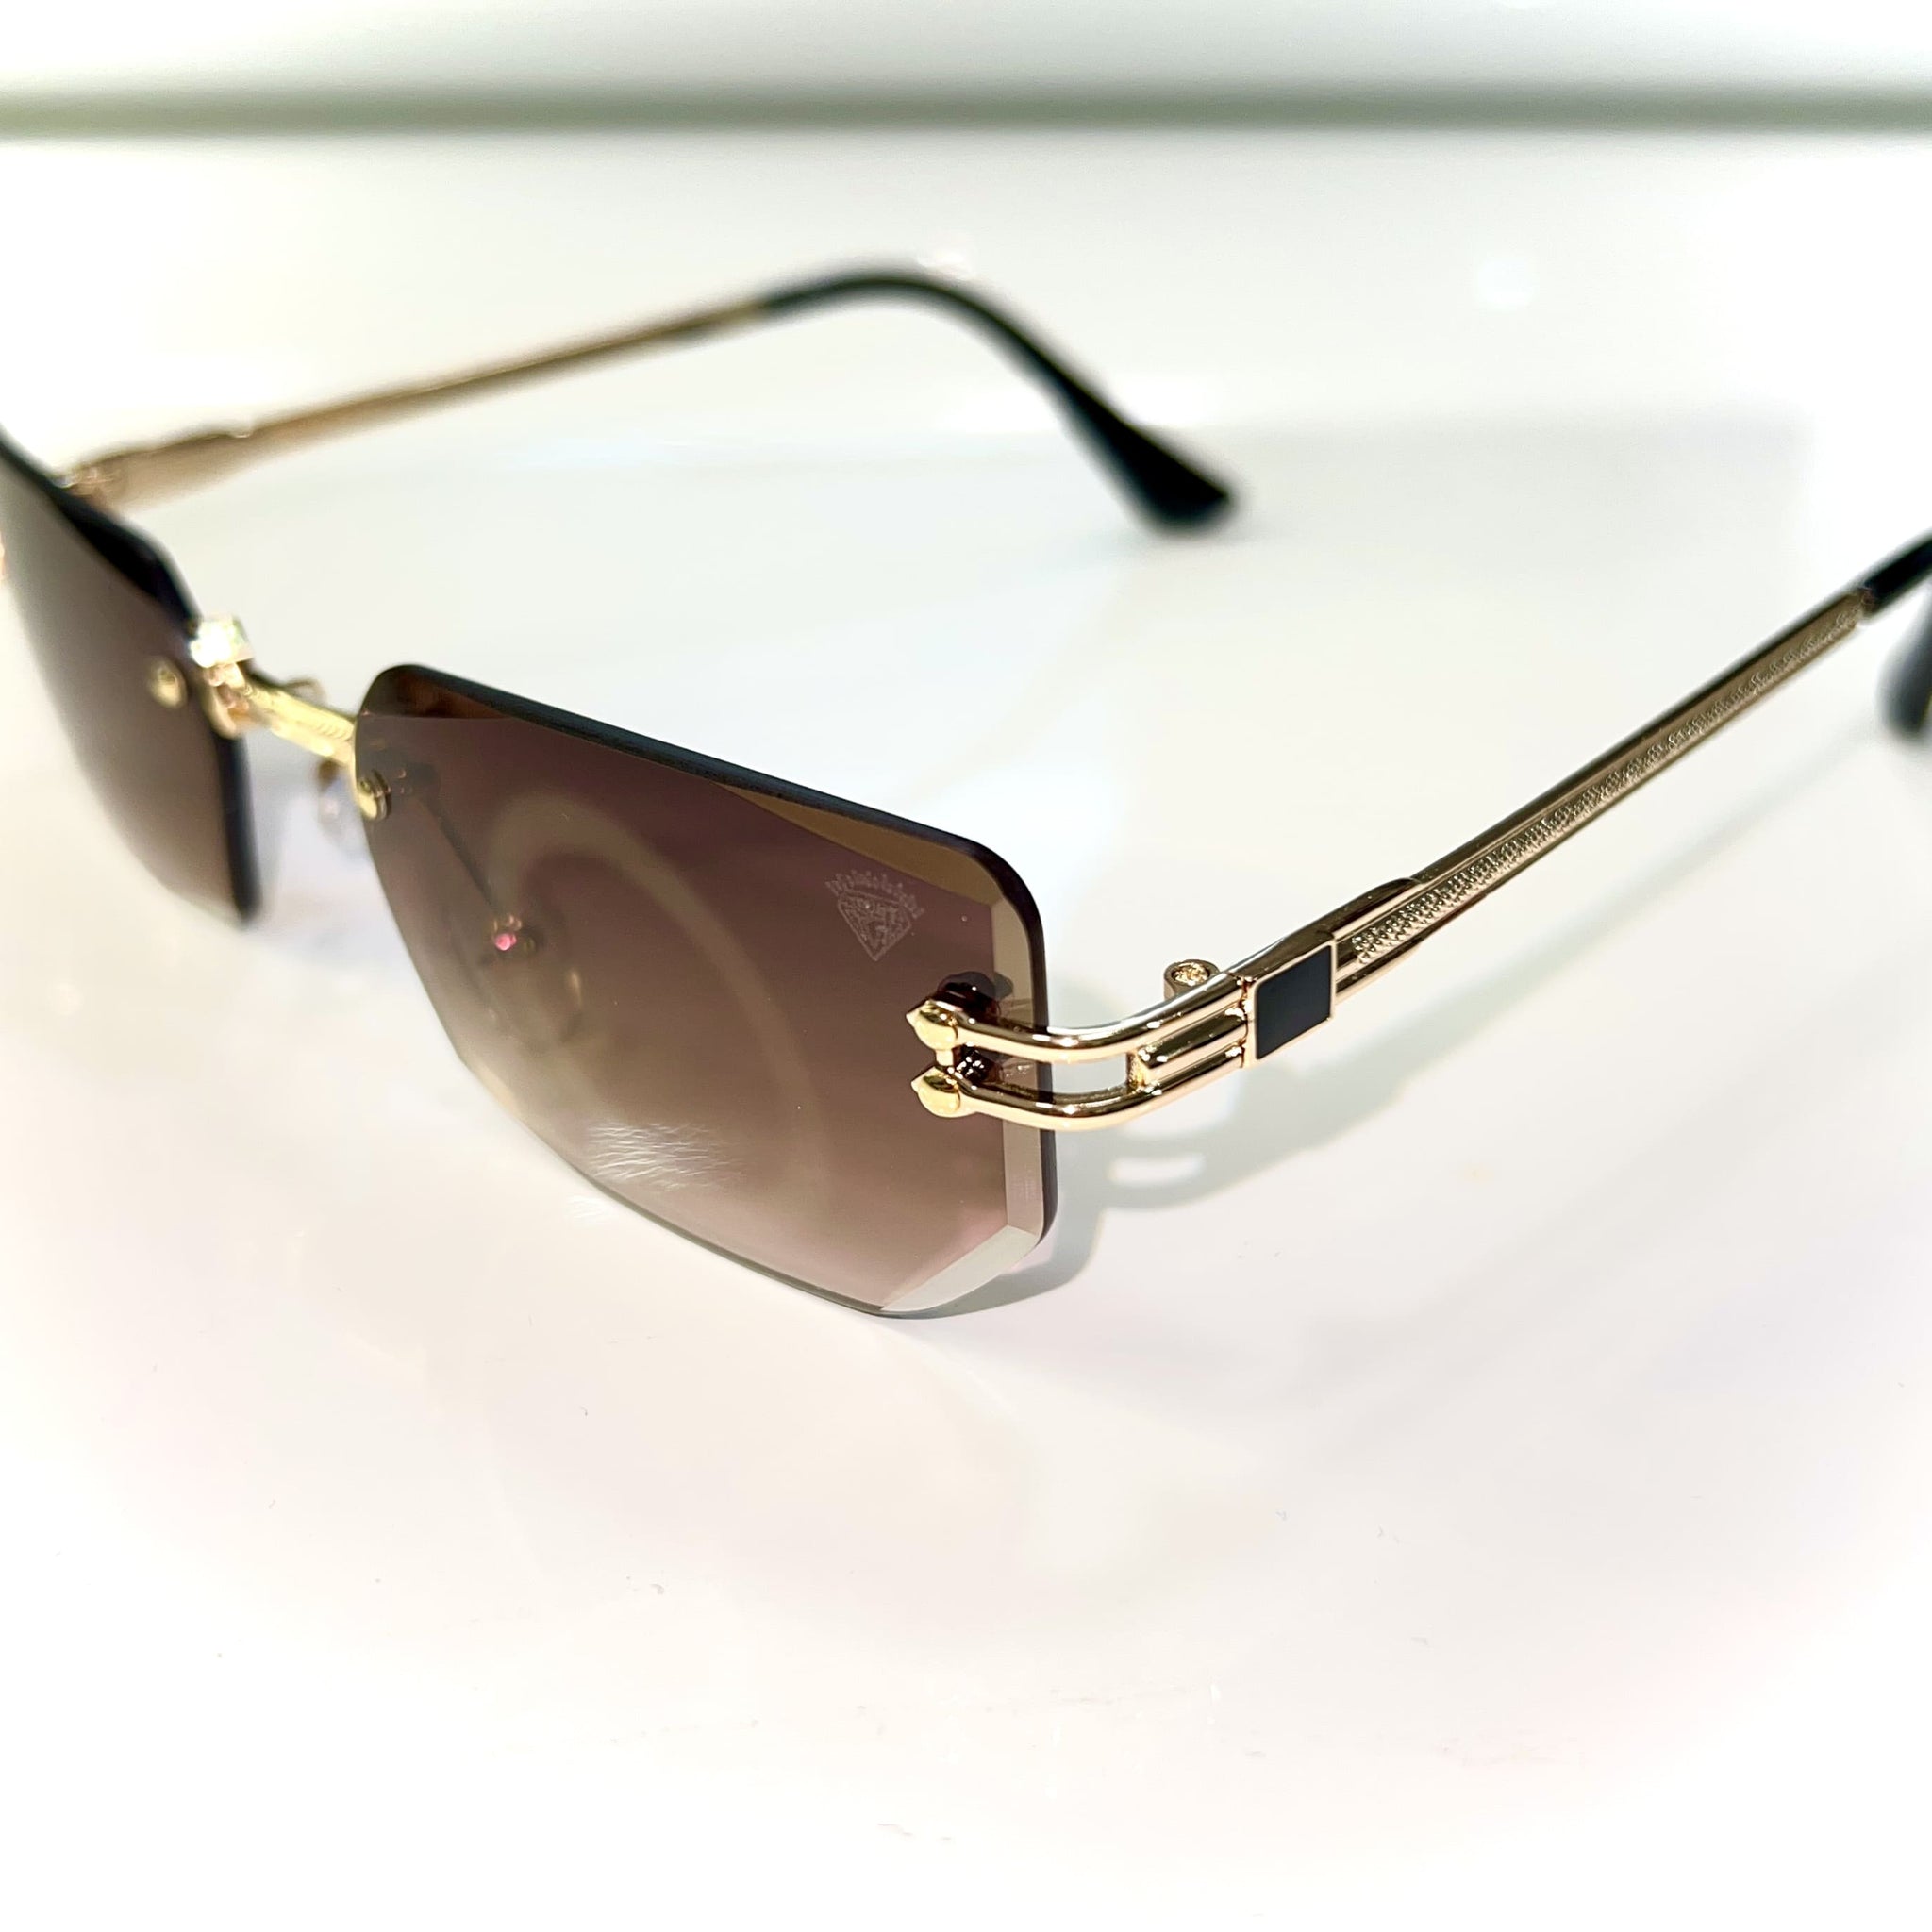 Rich Glasses - 14k gold plated - Diamond Cut - Brown Shade - Sehgal Glasses